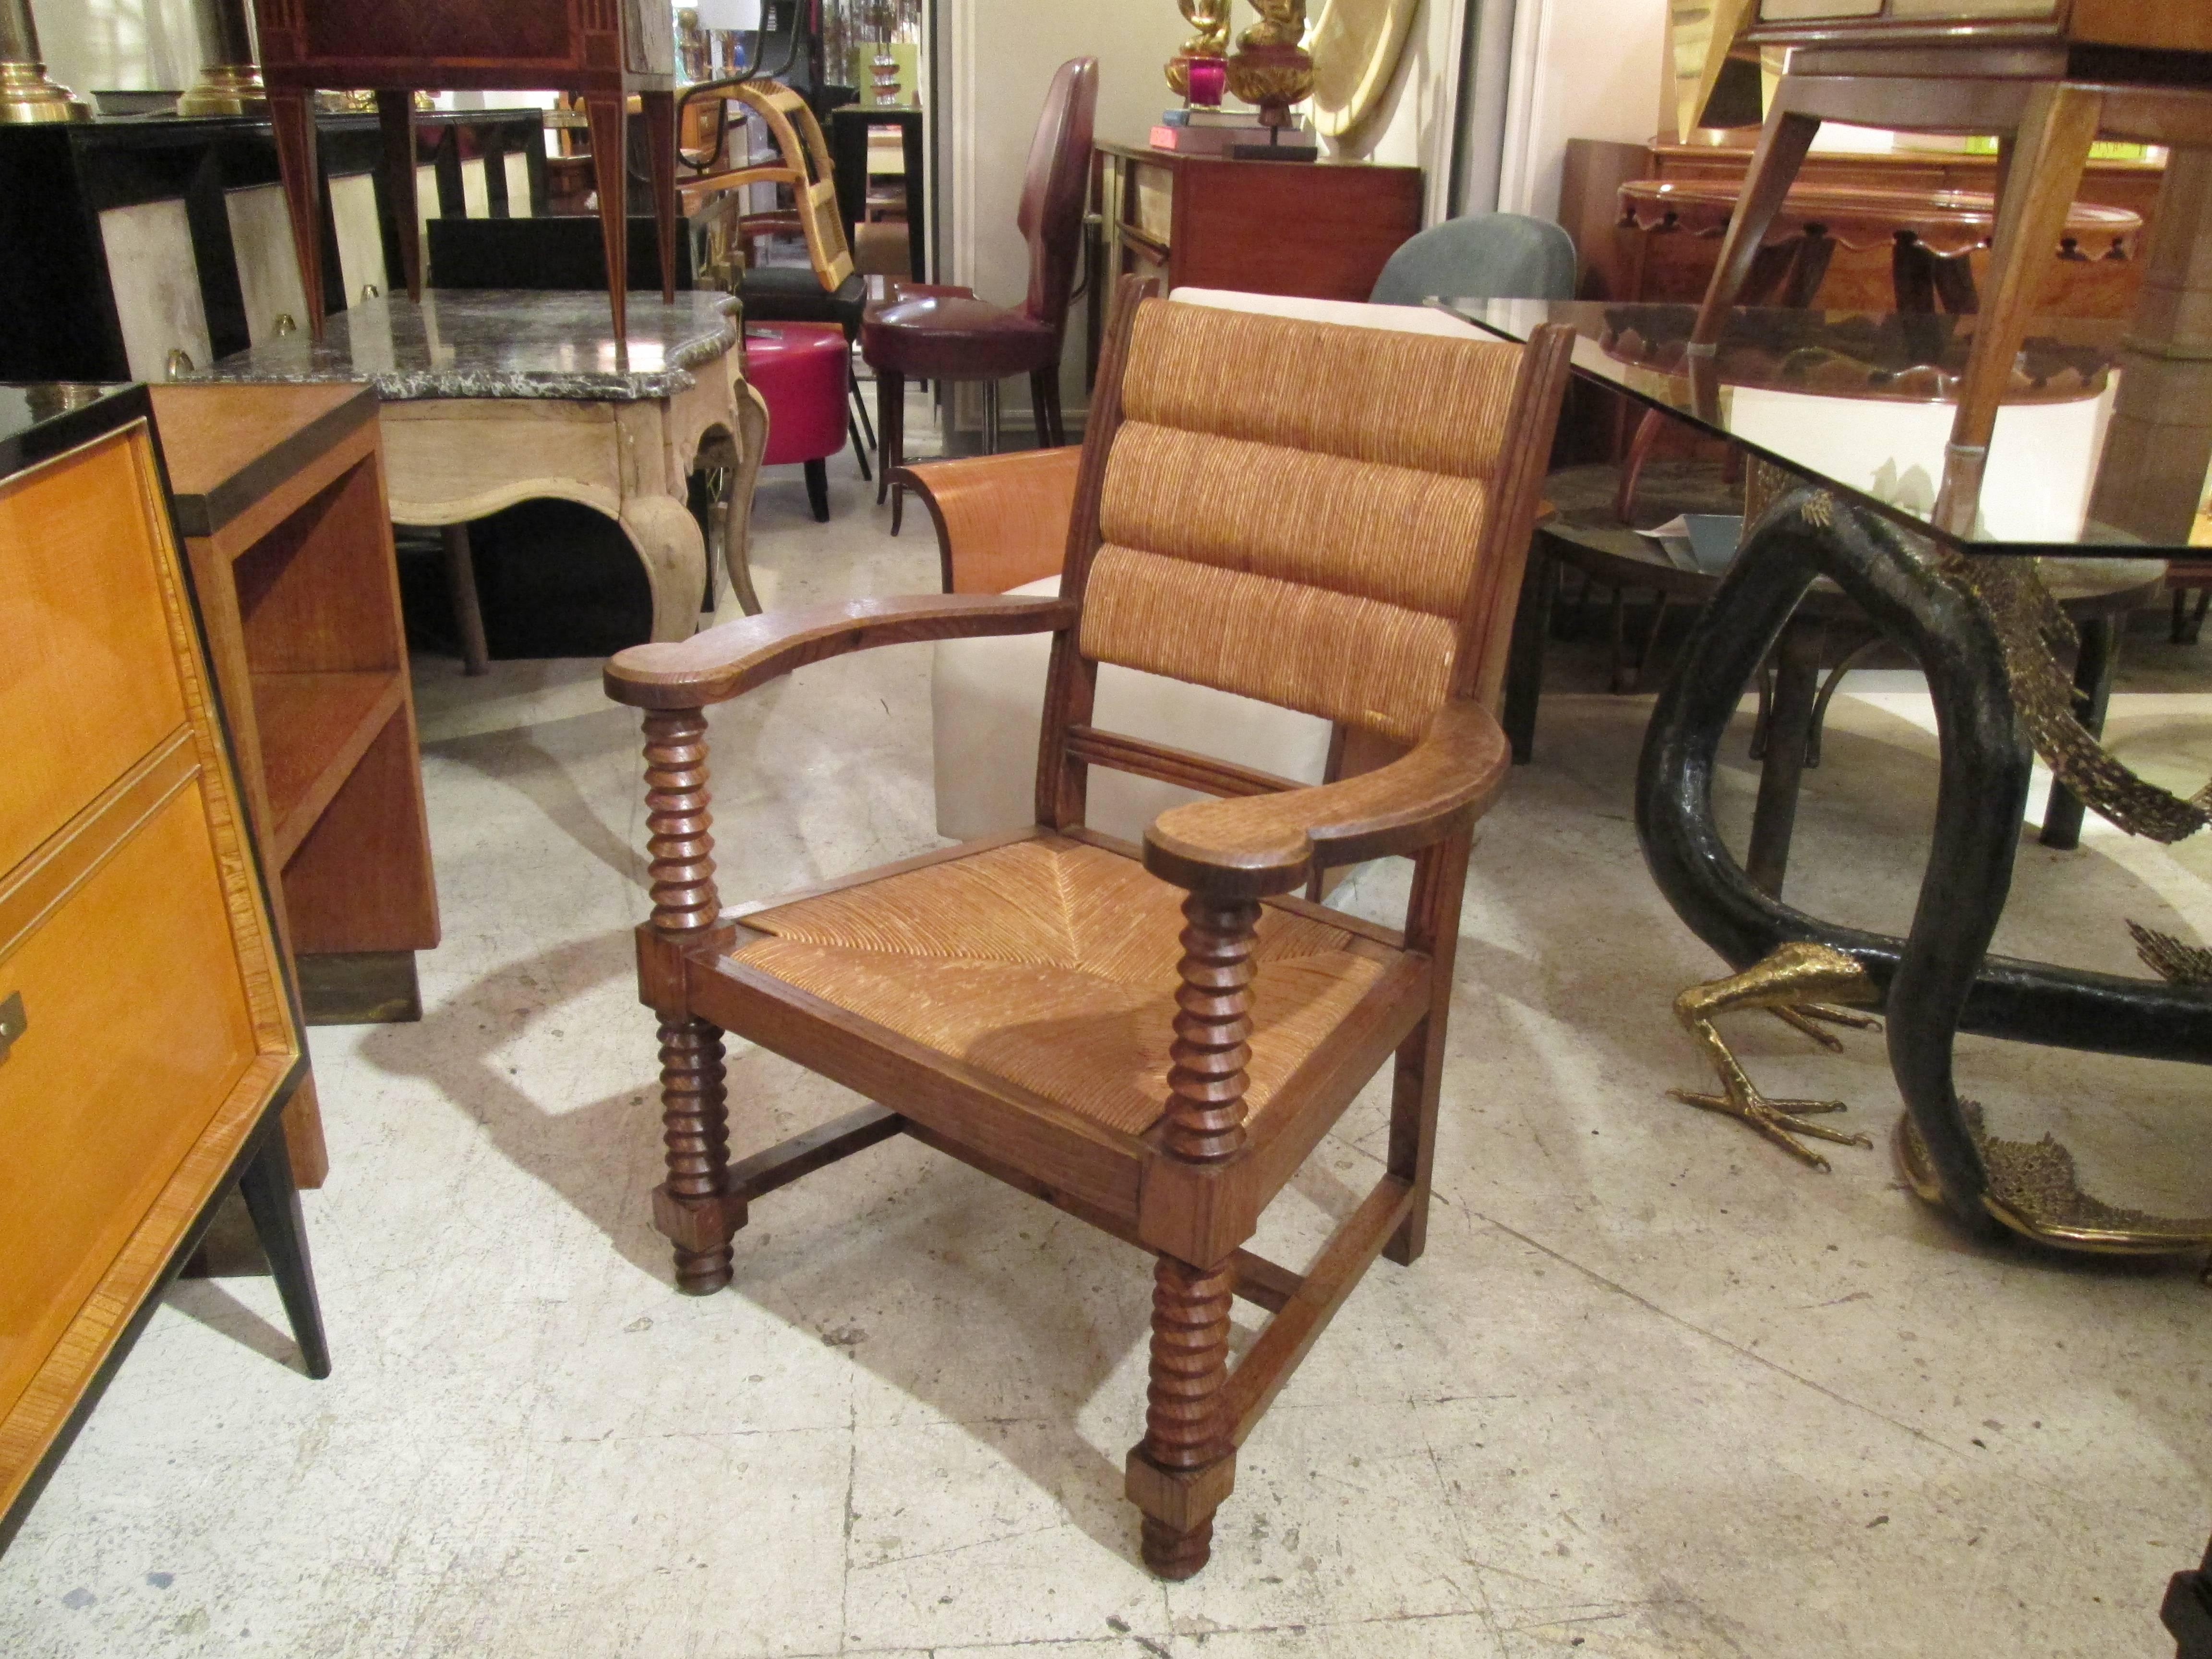 Unusual pair of caned, oak armchairs with barley-twist arms and legs, French, 1940s-1950s.